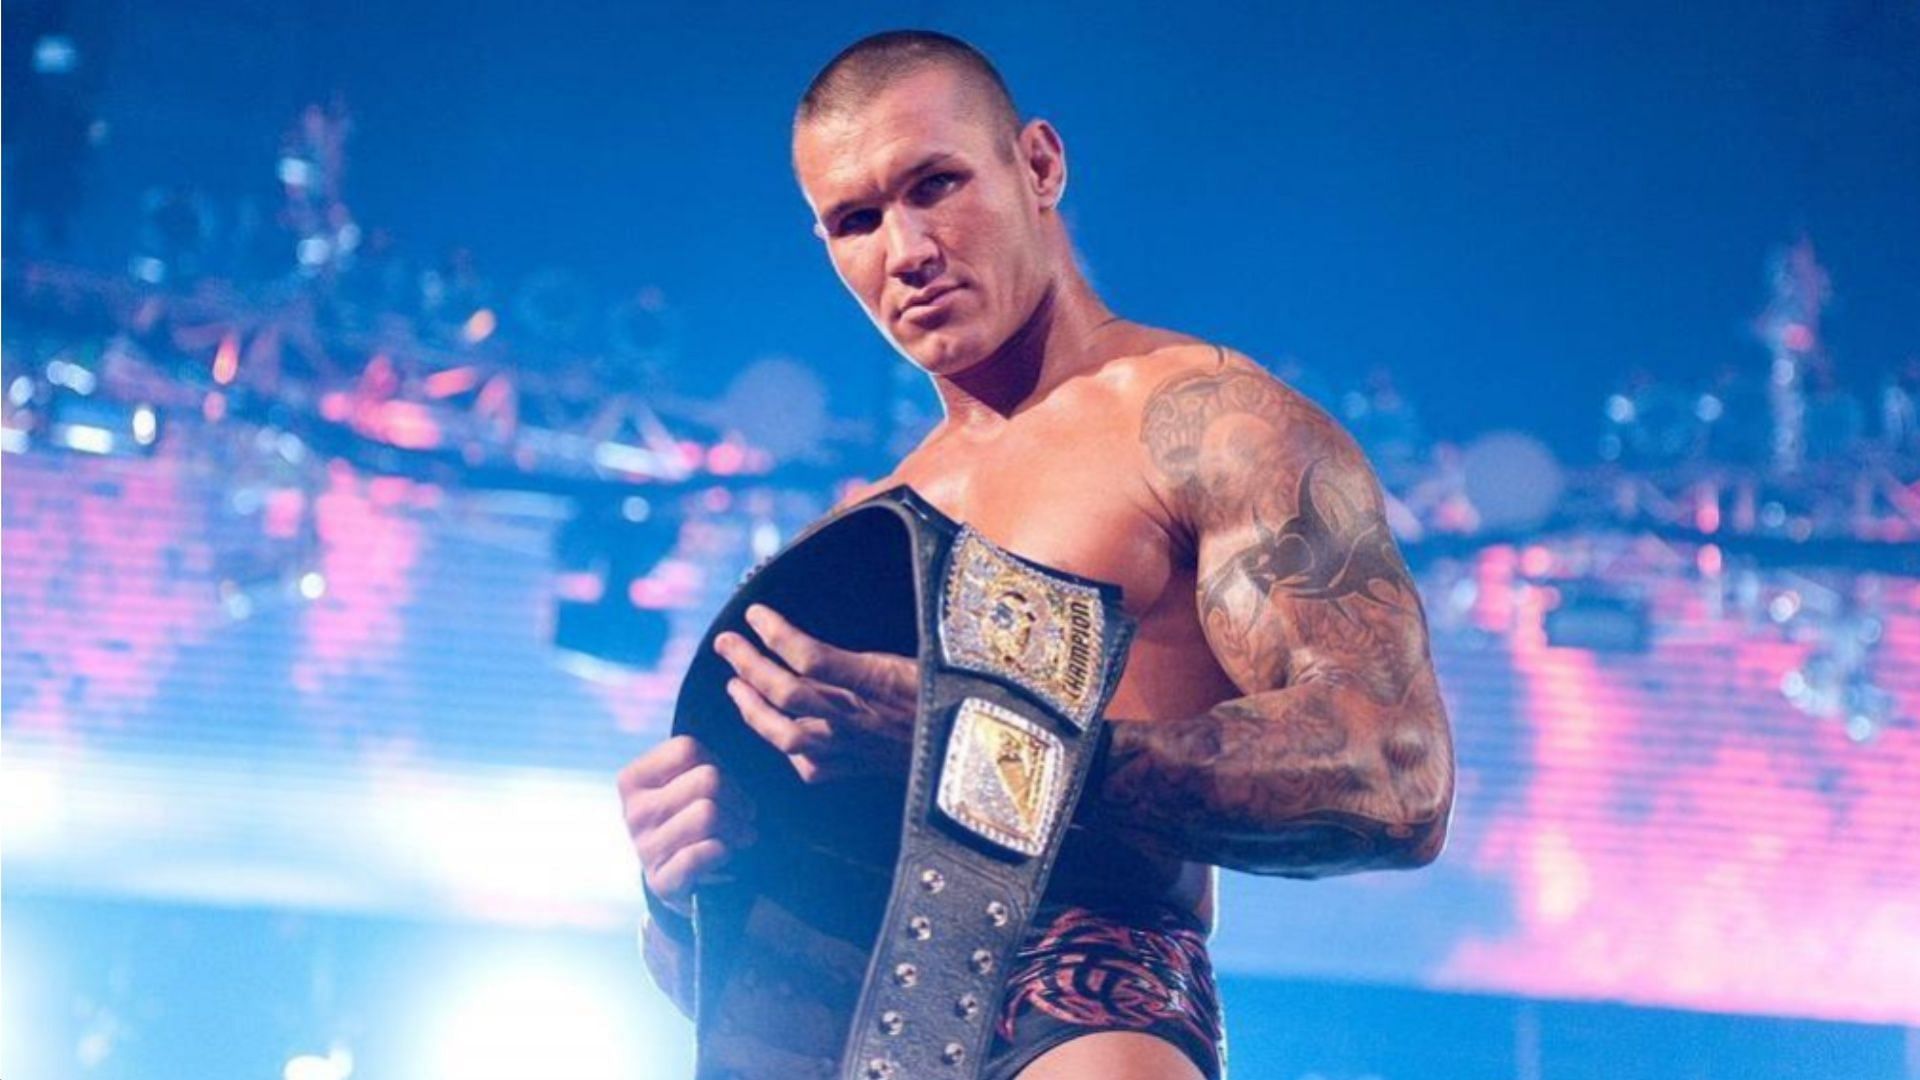 Randy Orton holding the WWE Championship at an event.